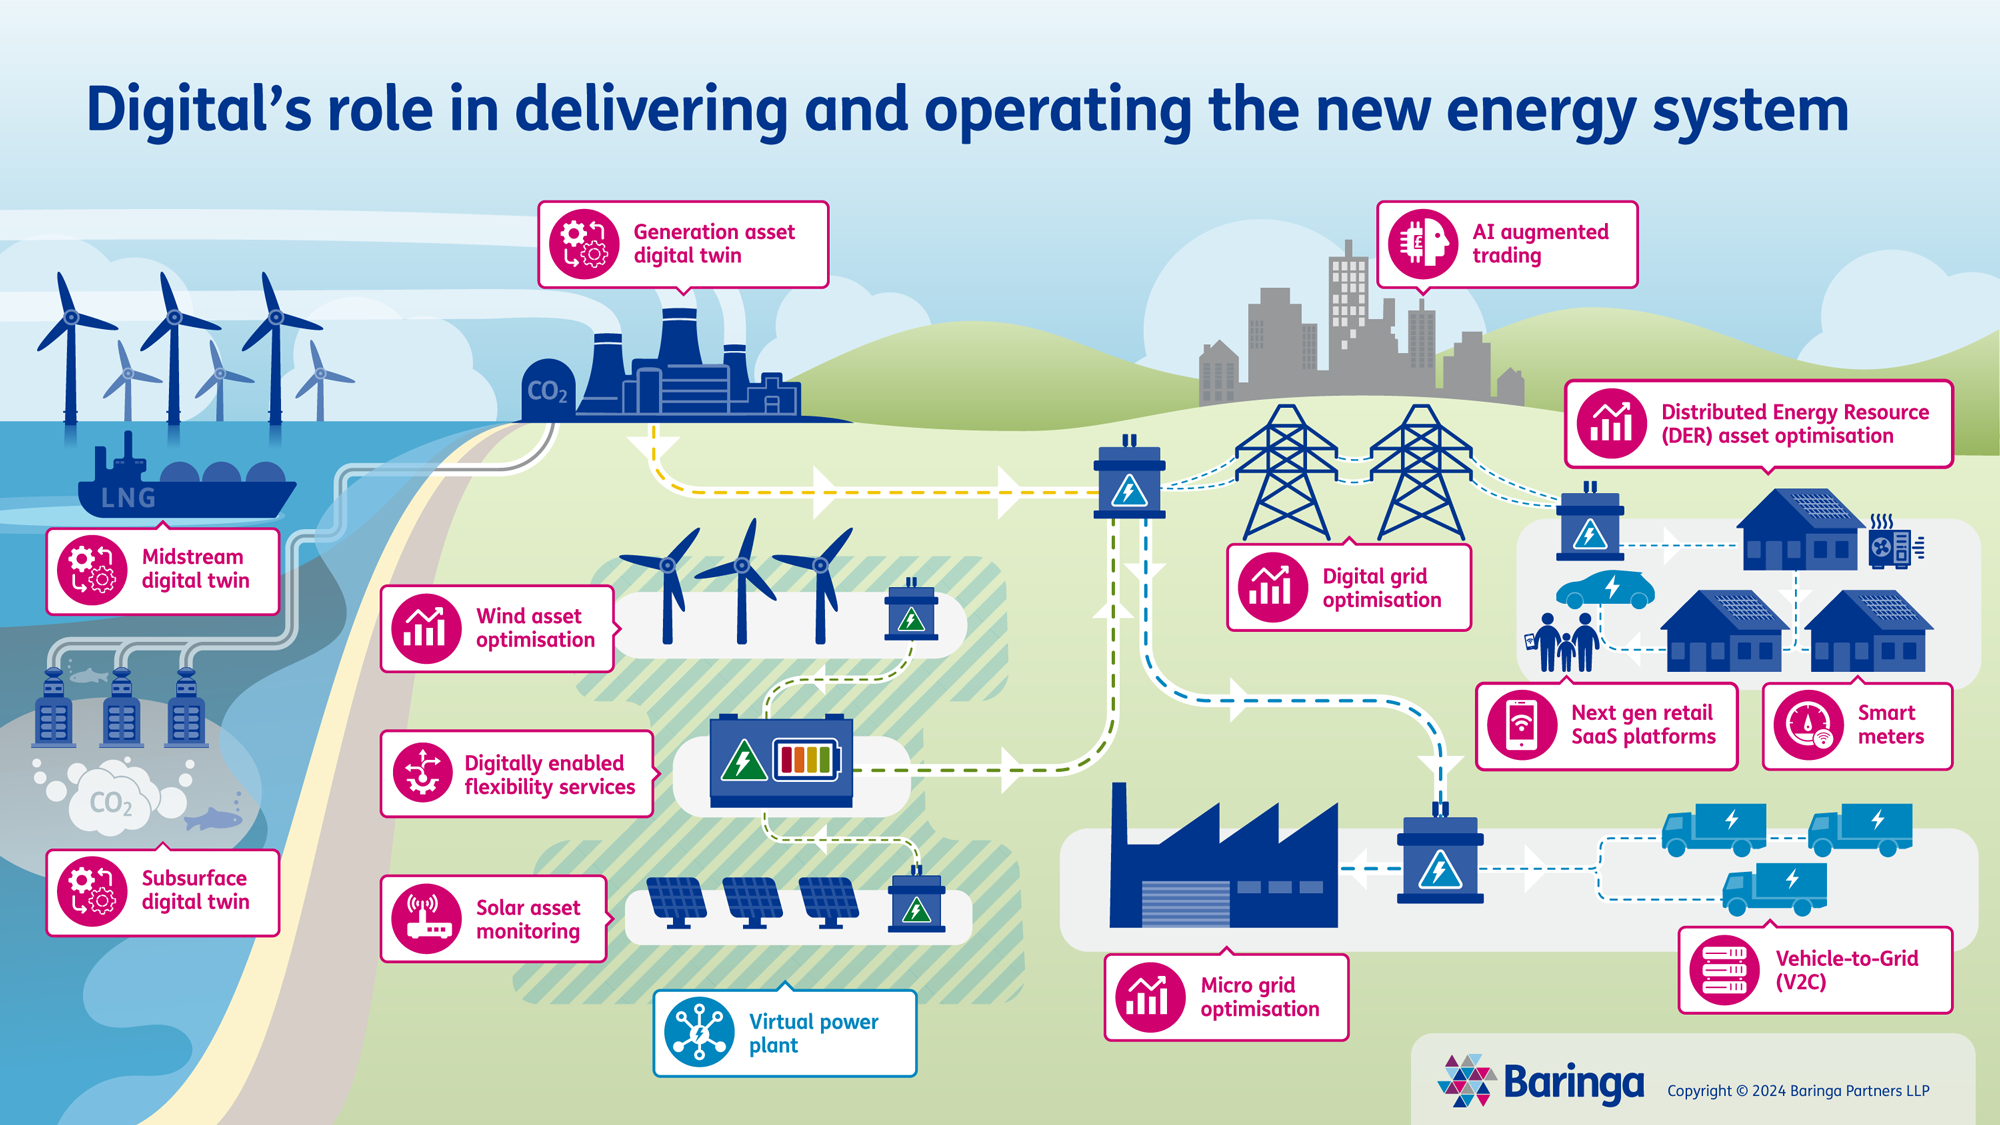 Digital's role in delivering and operating the new energy system